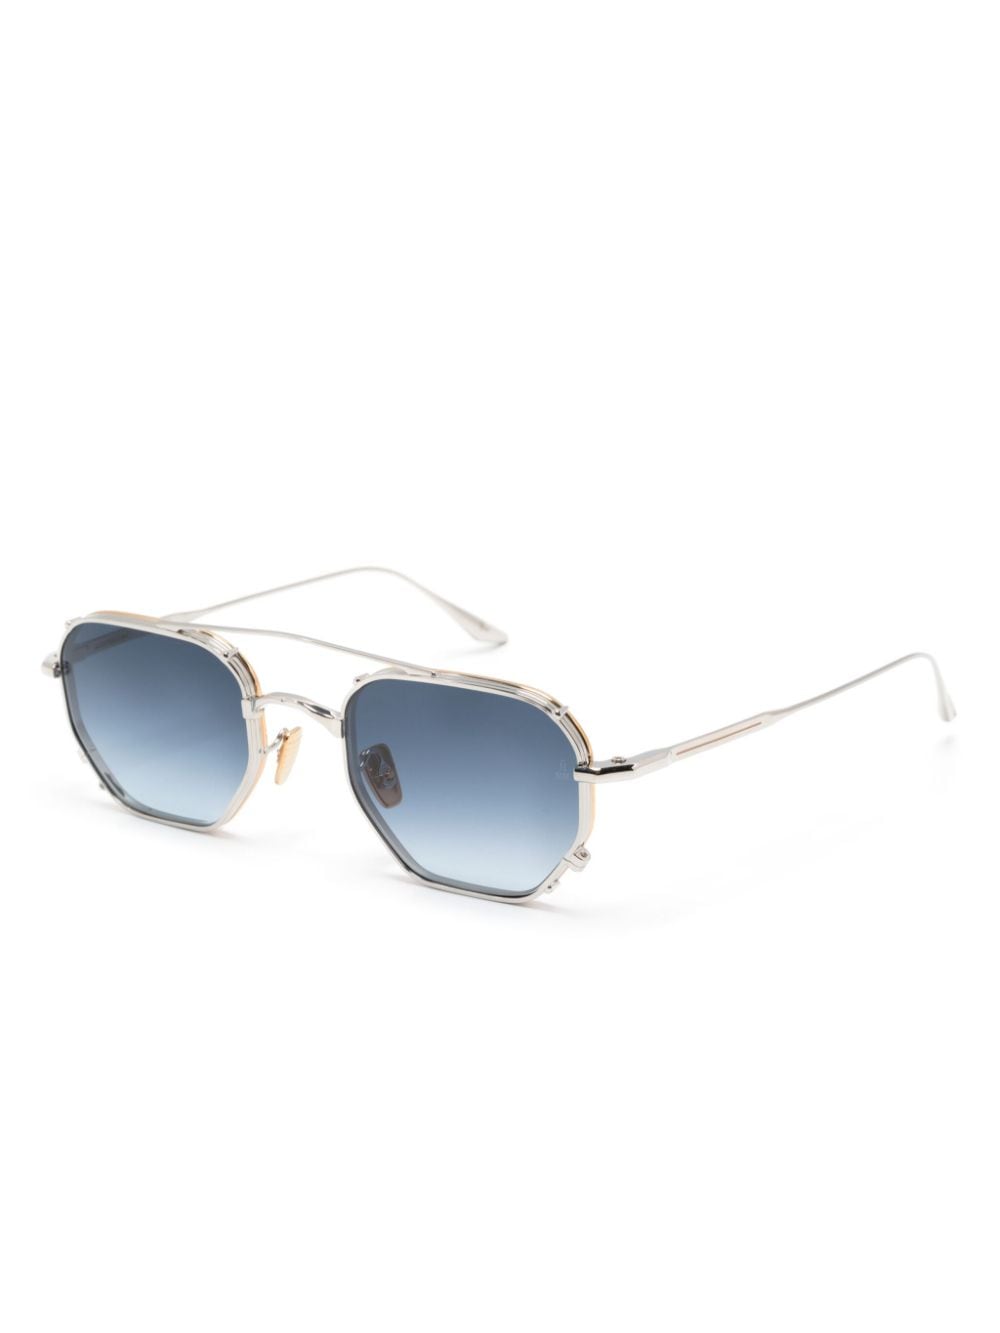 Jacques Marie Mage JACQUES MARIE MAGE- Marbot Sunglasses